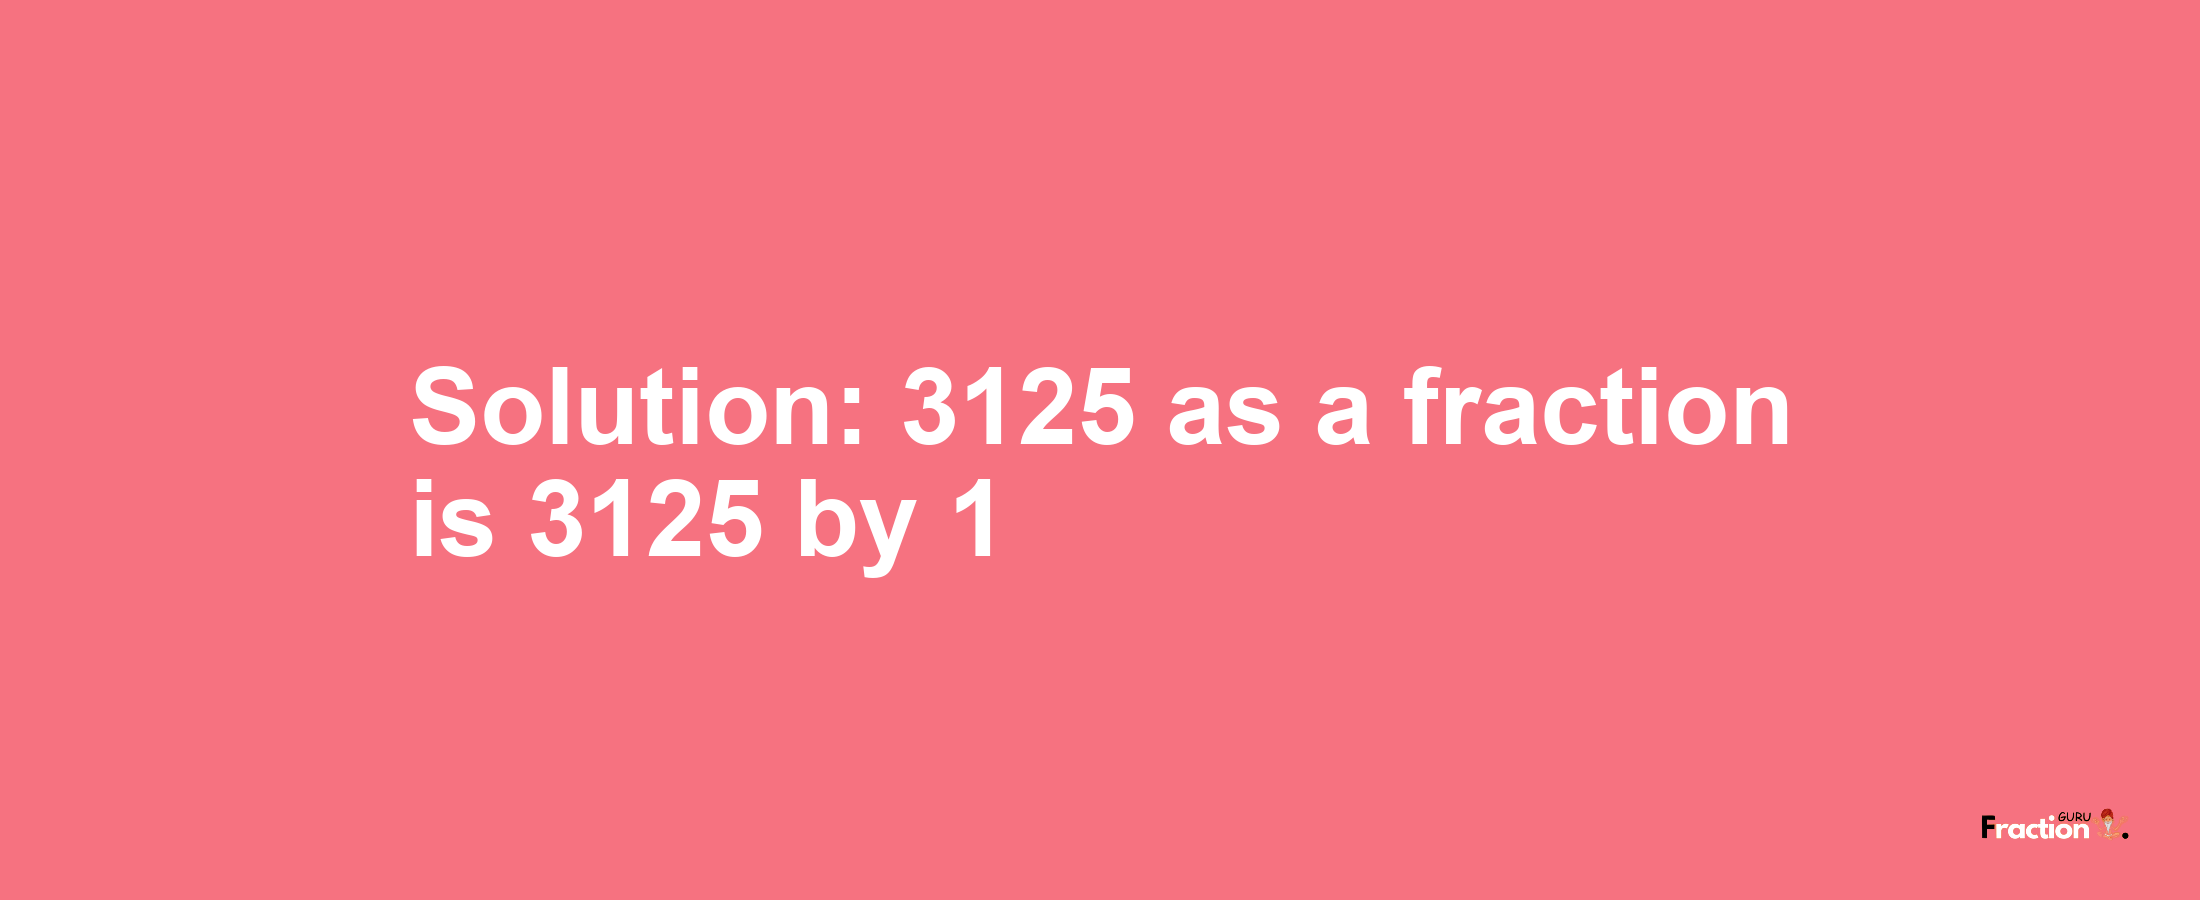 Solution:3125 as a fraction is 3125/1